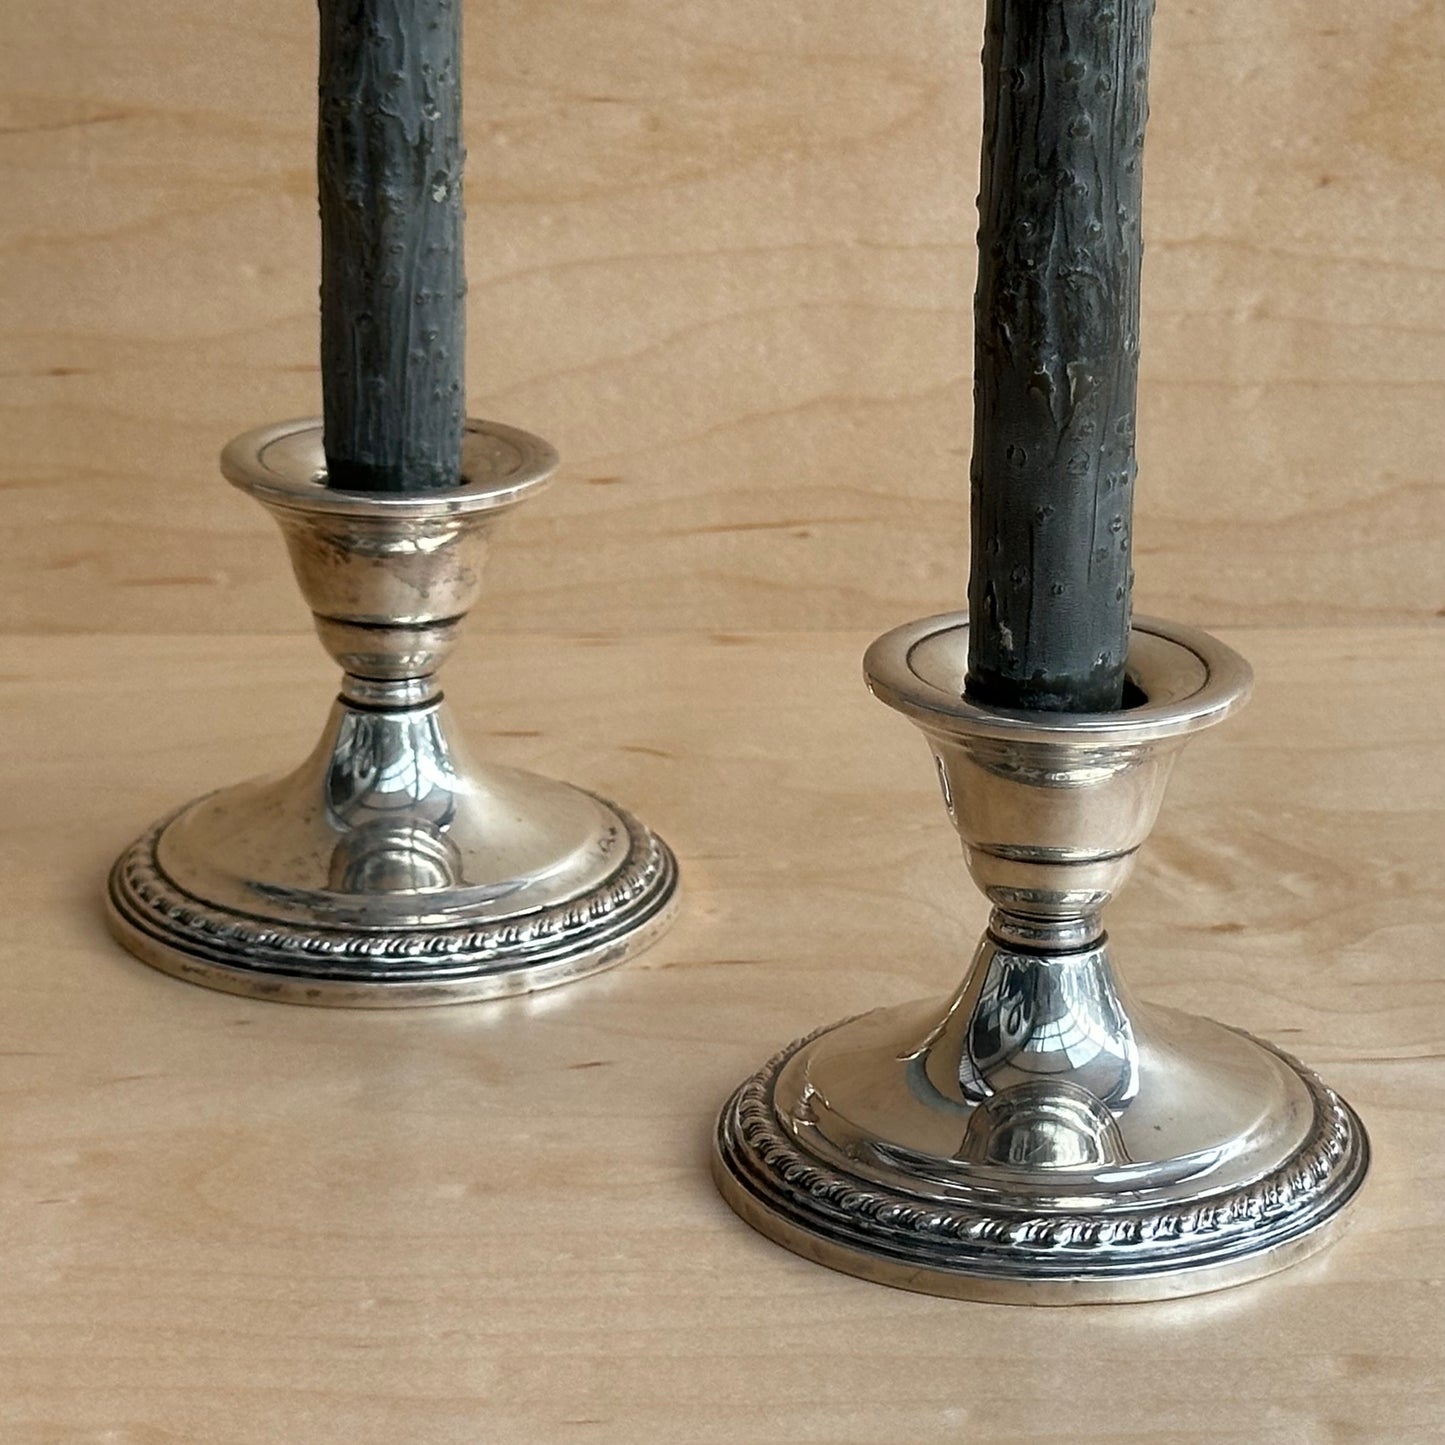 Vintage Sterling Candlesticks with Rope Motif